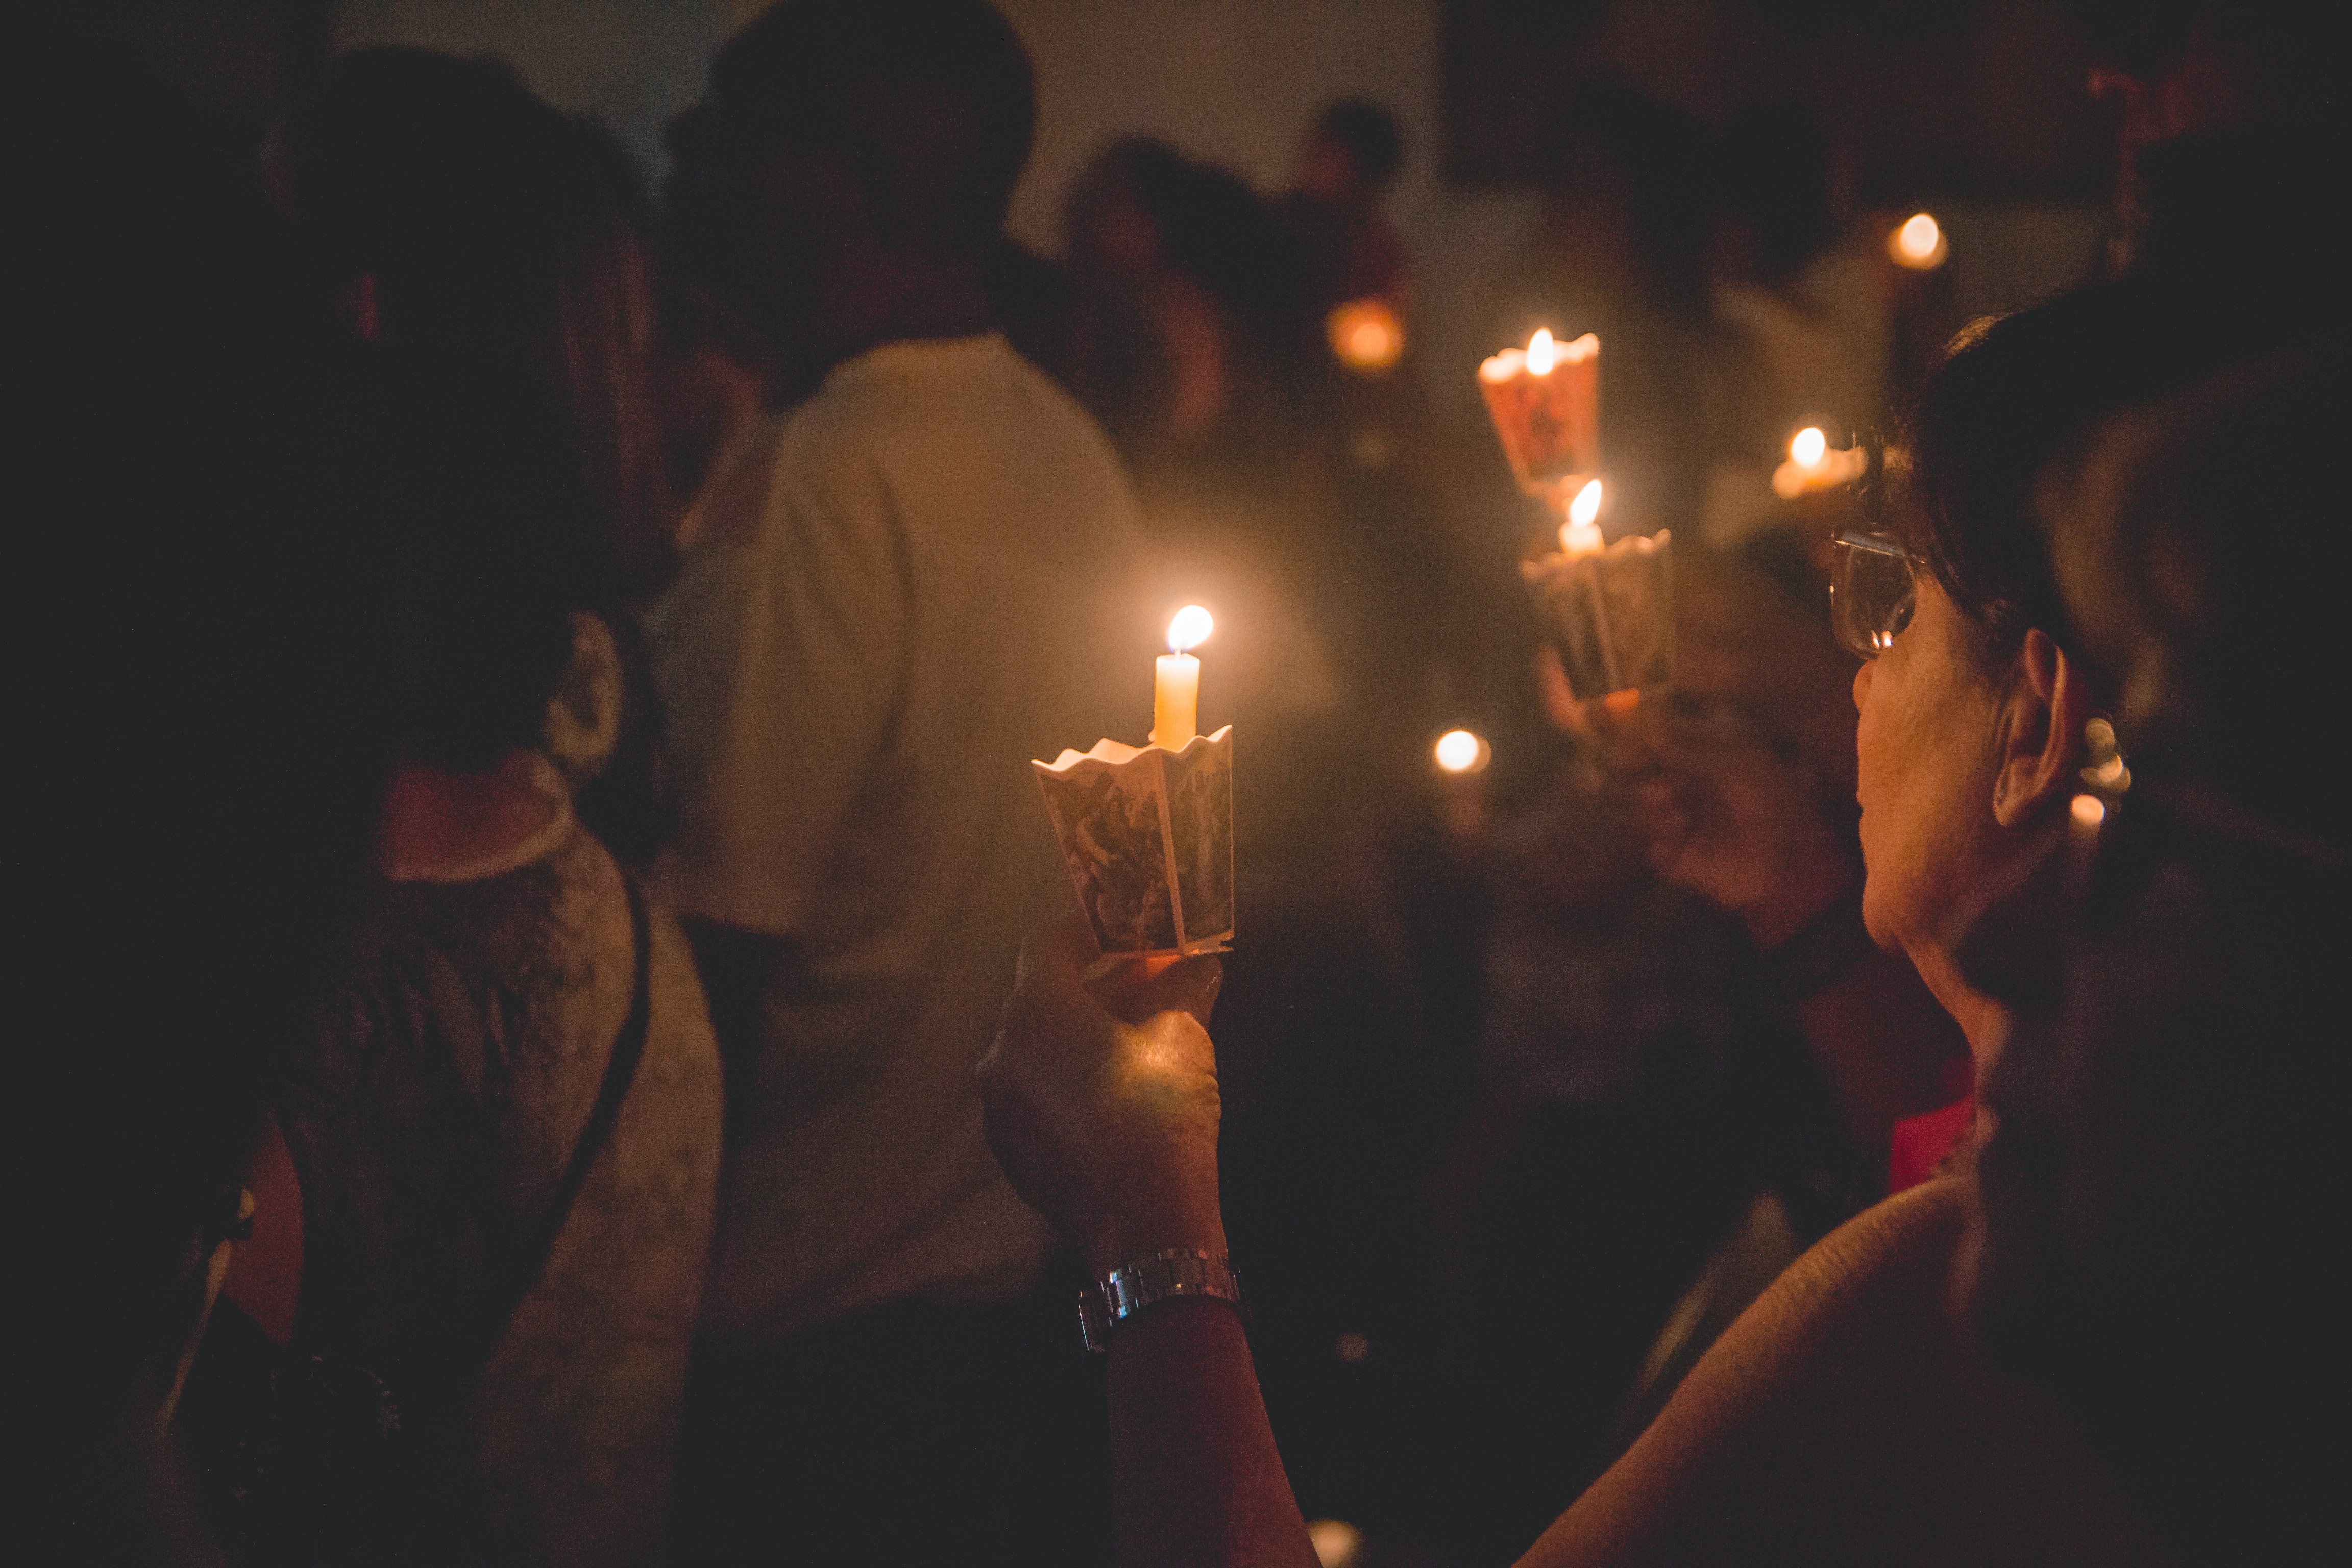 People holding lighted candles - photo by Thays Orrico on Unsplash